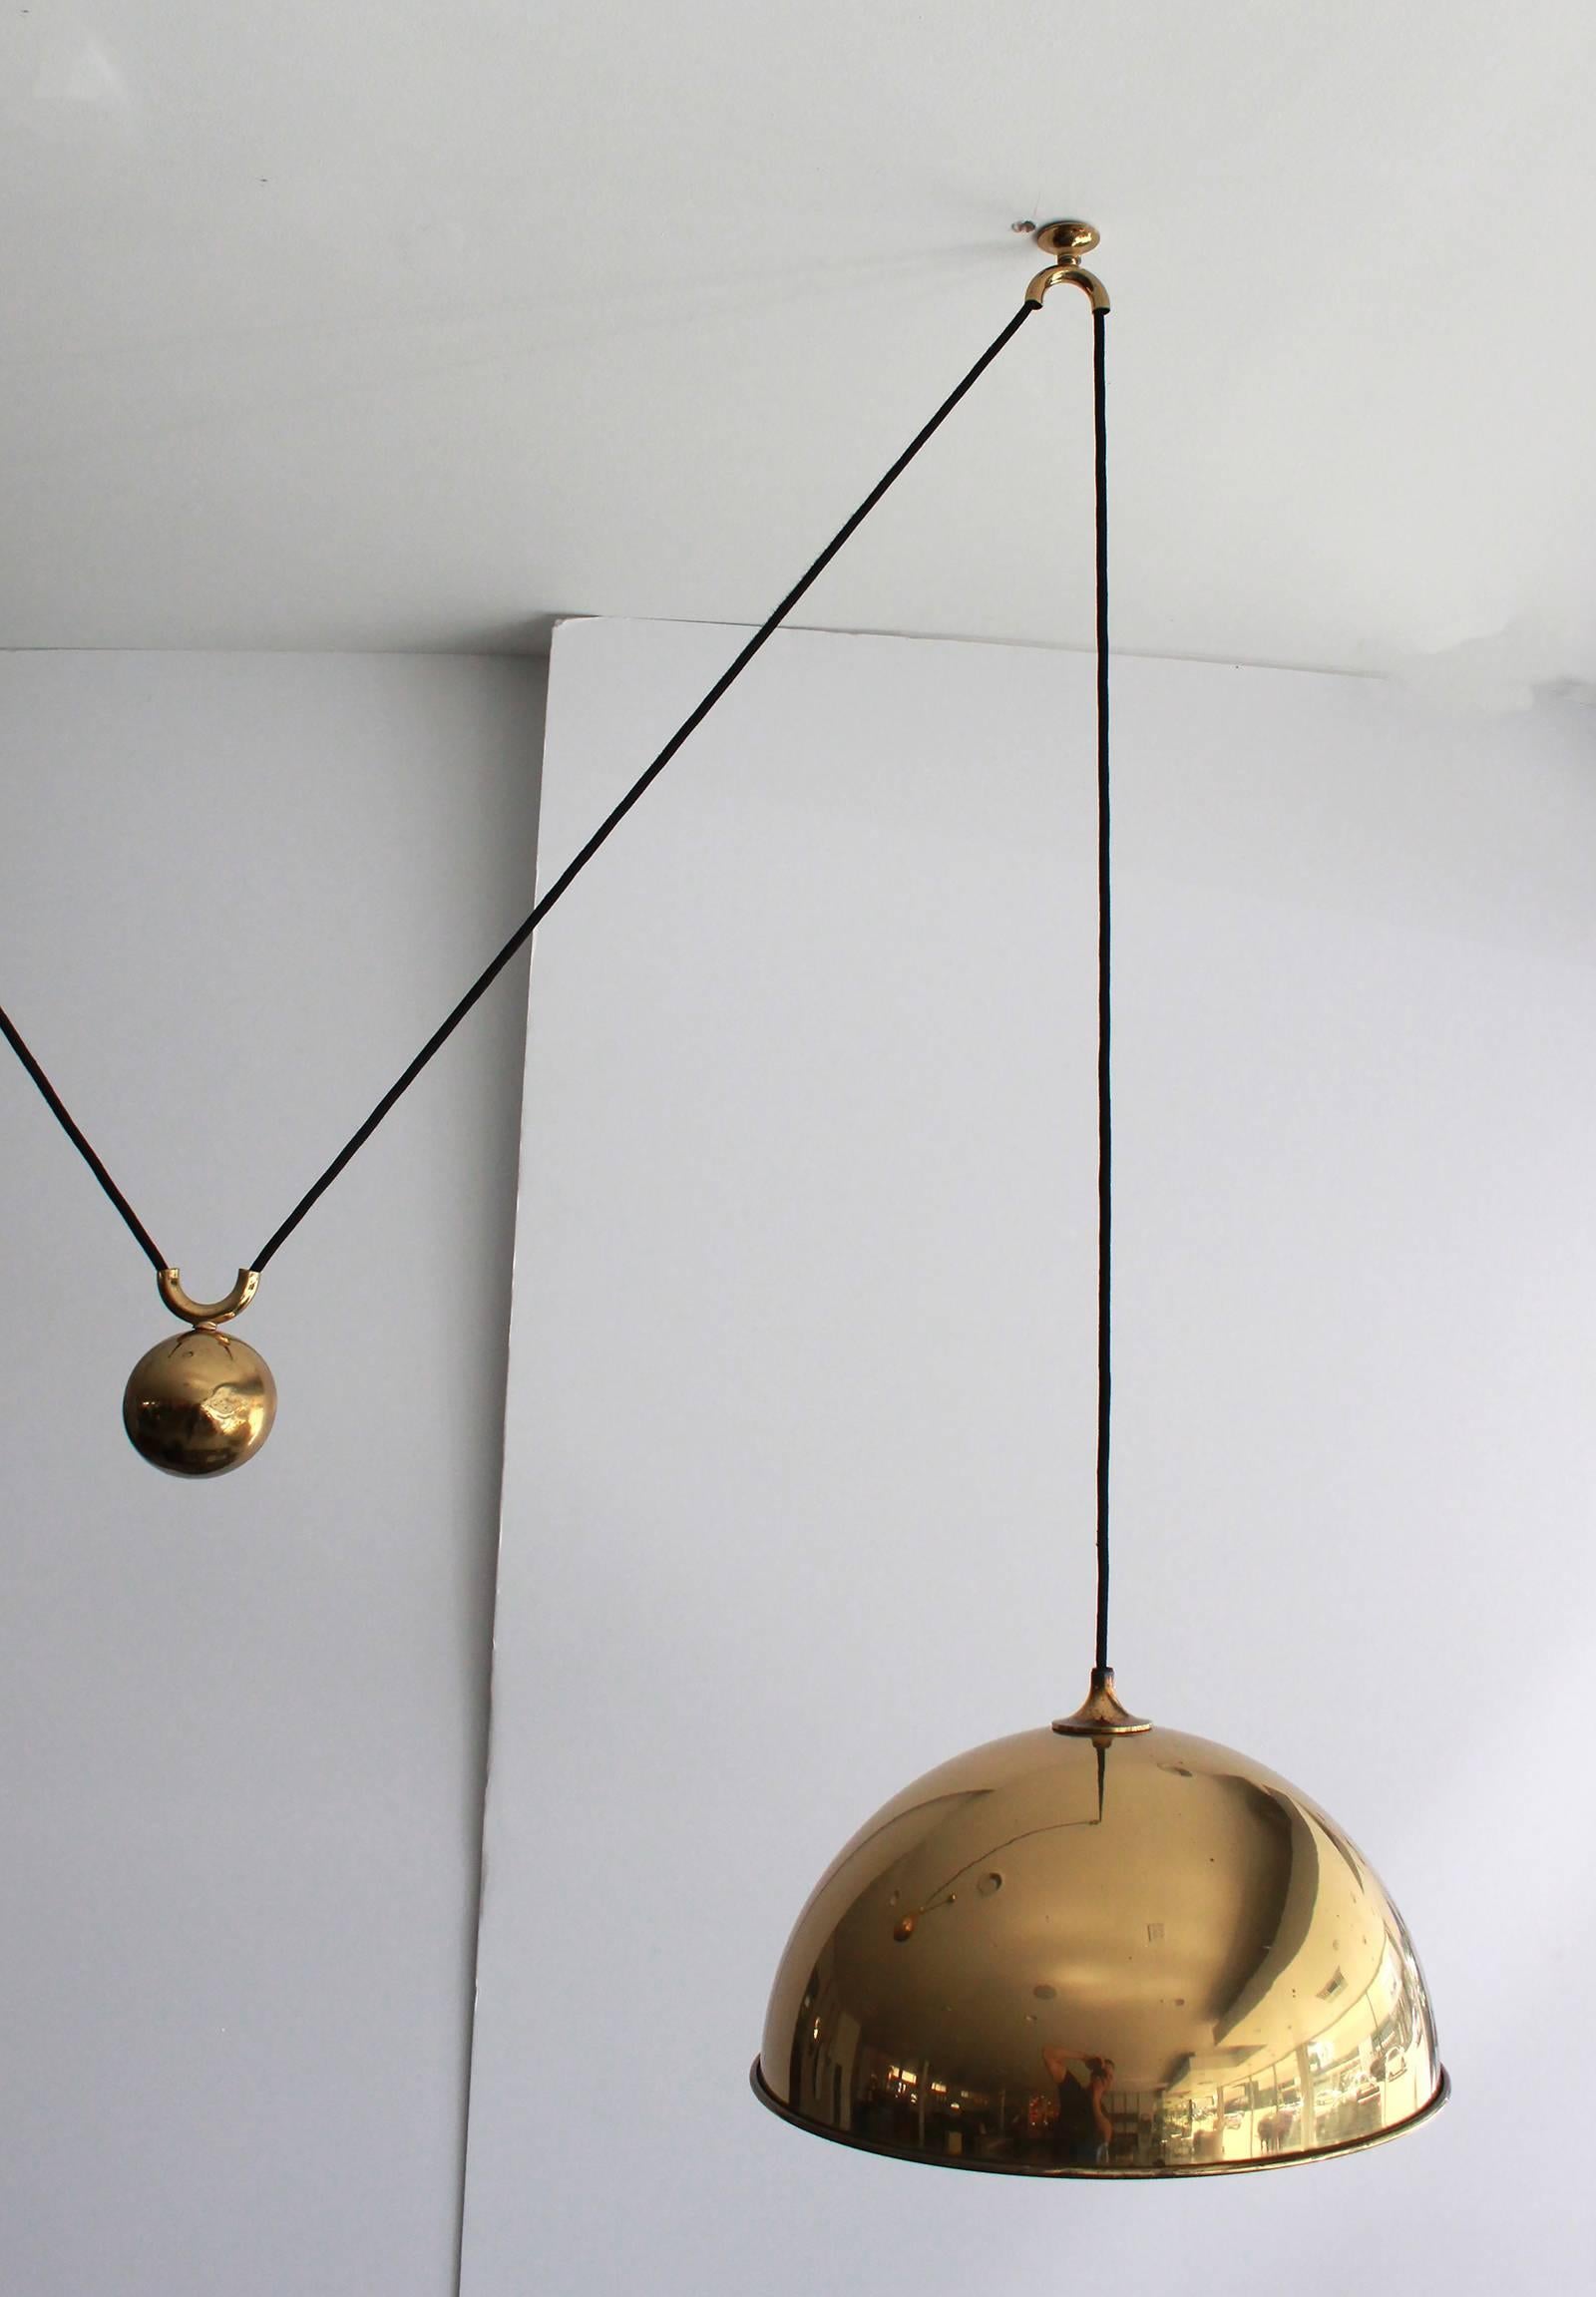 Large brass counter balance light by Florian Schulz. Impressive dome pendant cloth cord with heavy ball counterbalance. Light is height adjustable. Excellent vintage condition.